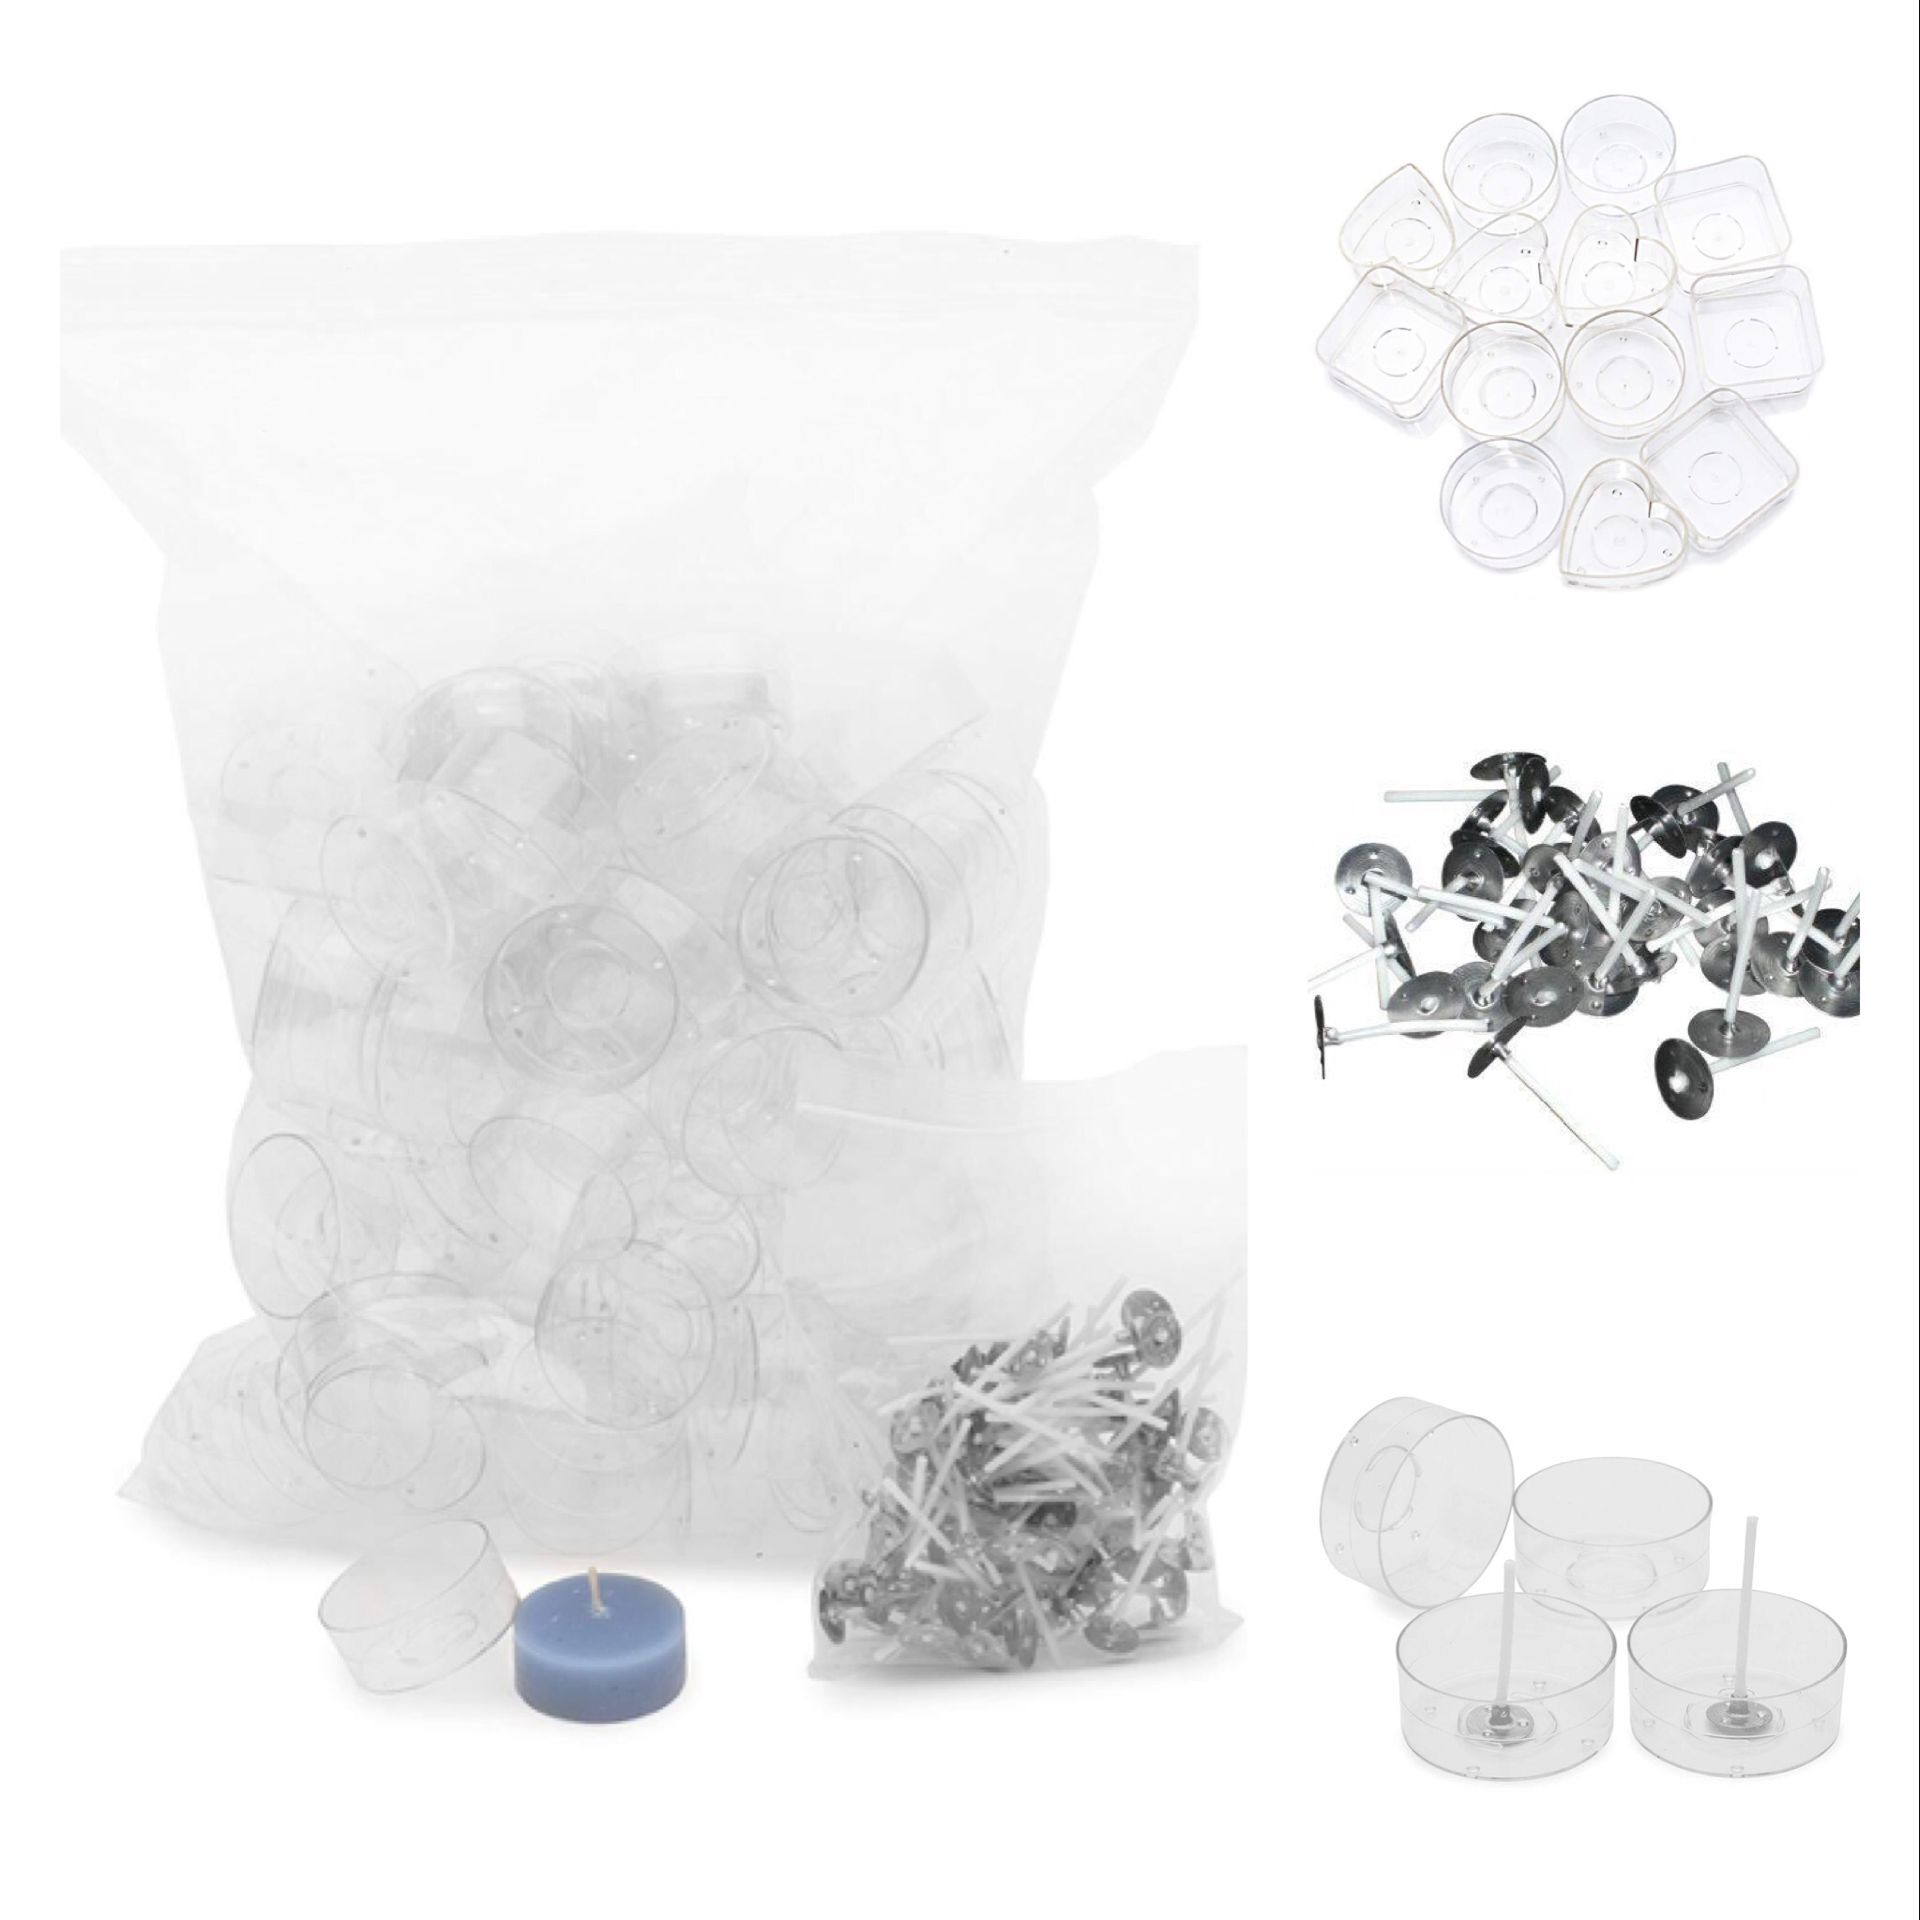 Wholesale Candle Making Kit Includes Candle Wick and Clear Plastic Tealight Cups For DIY Candle Making